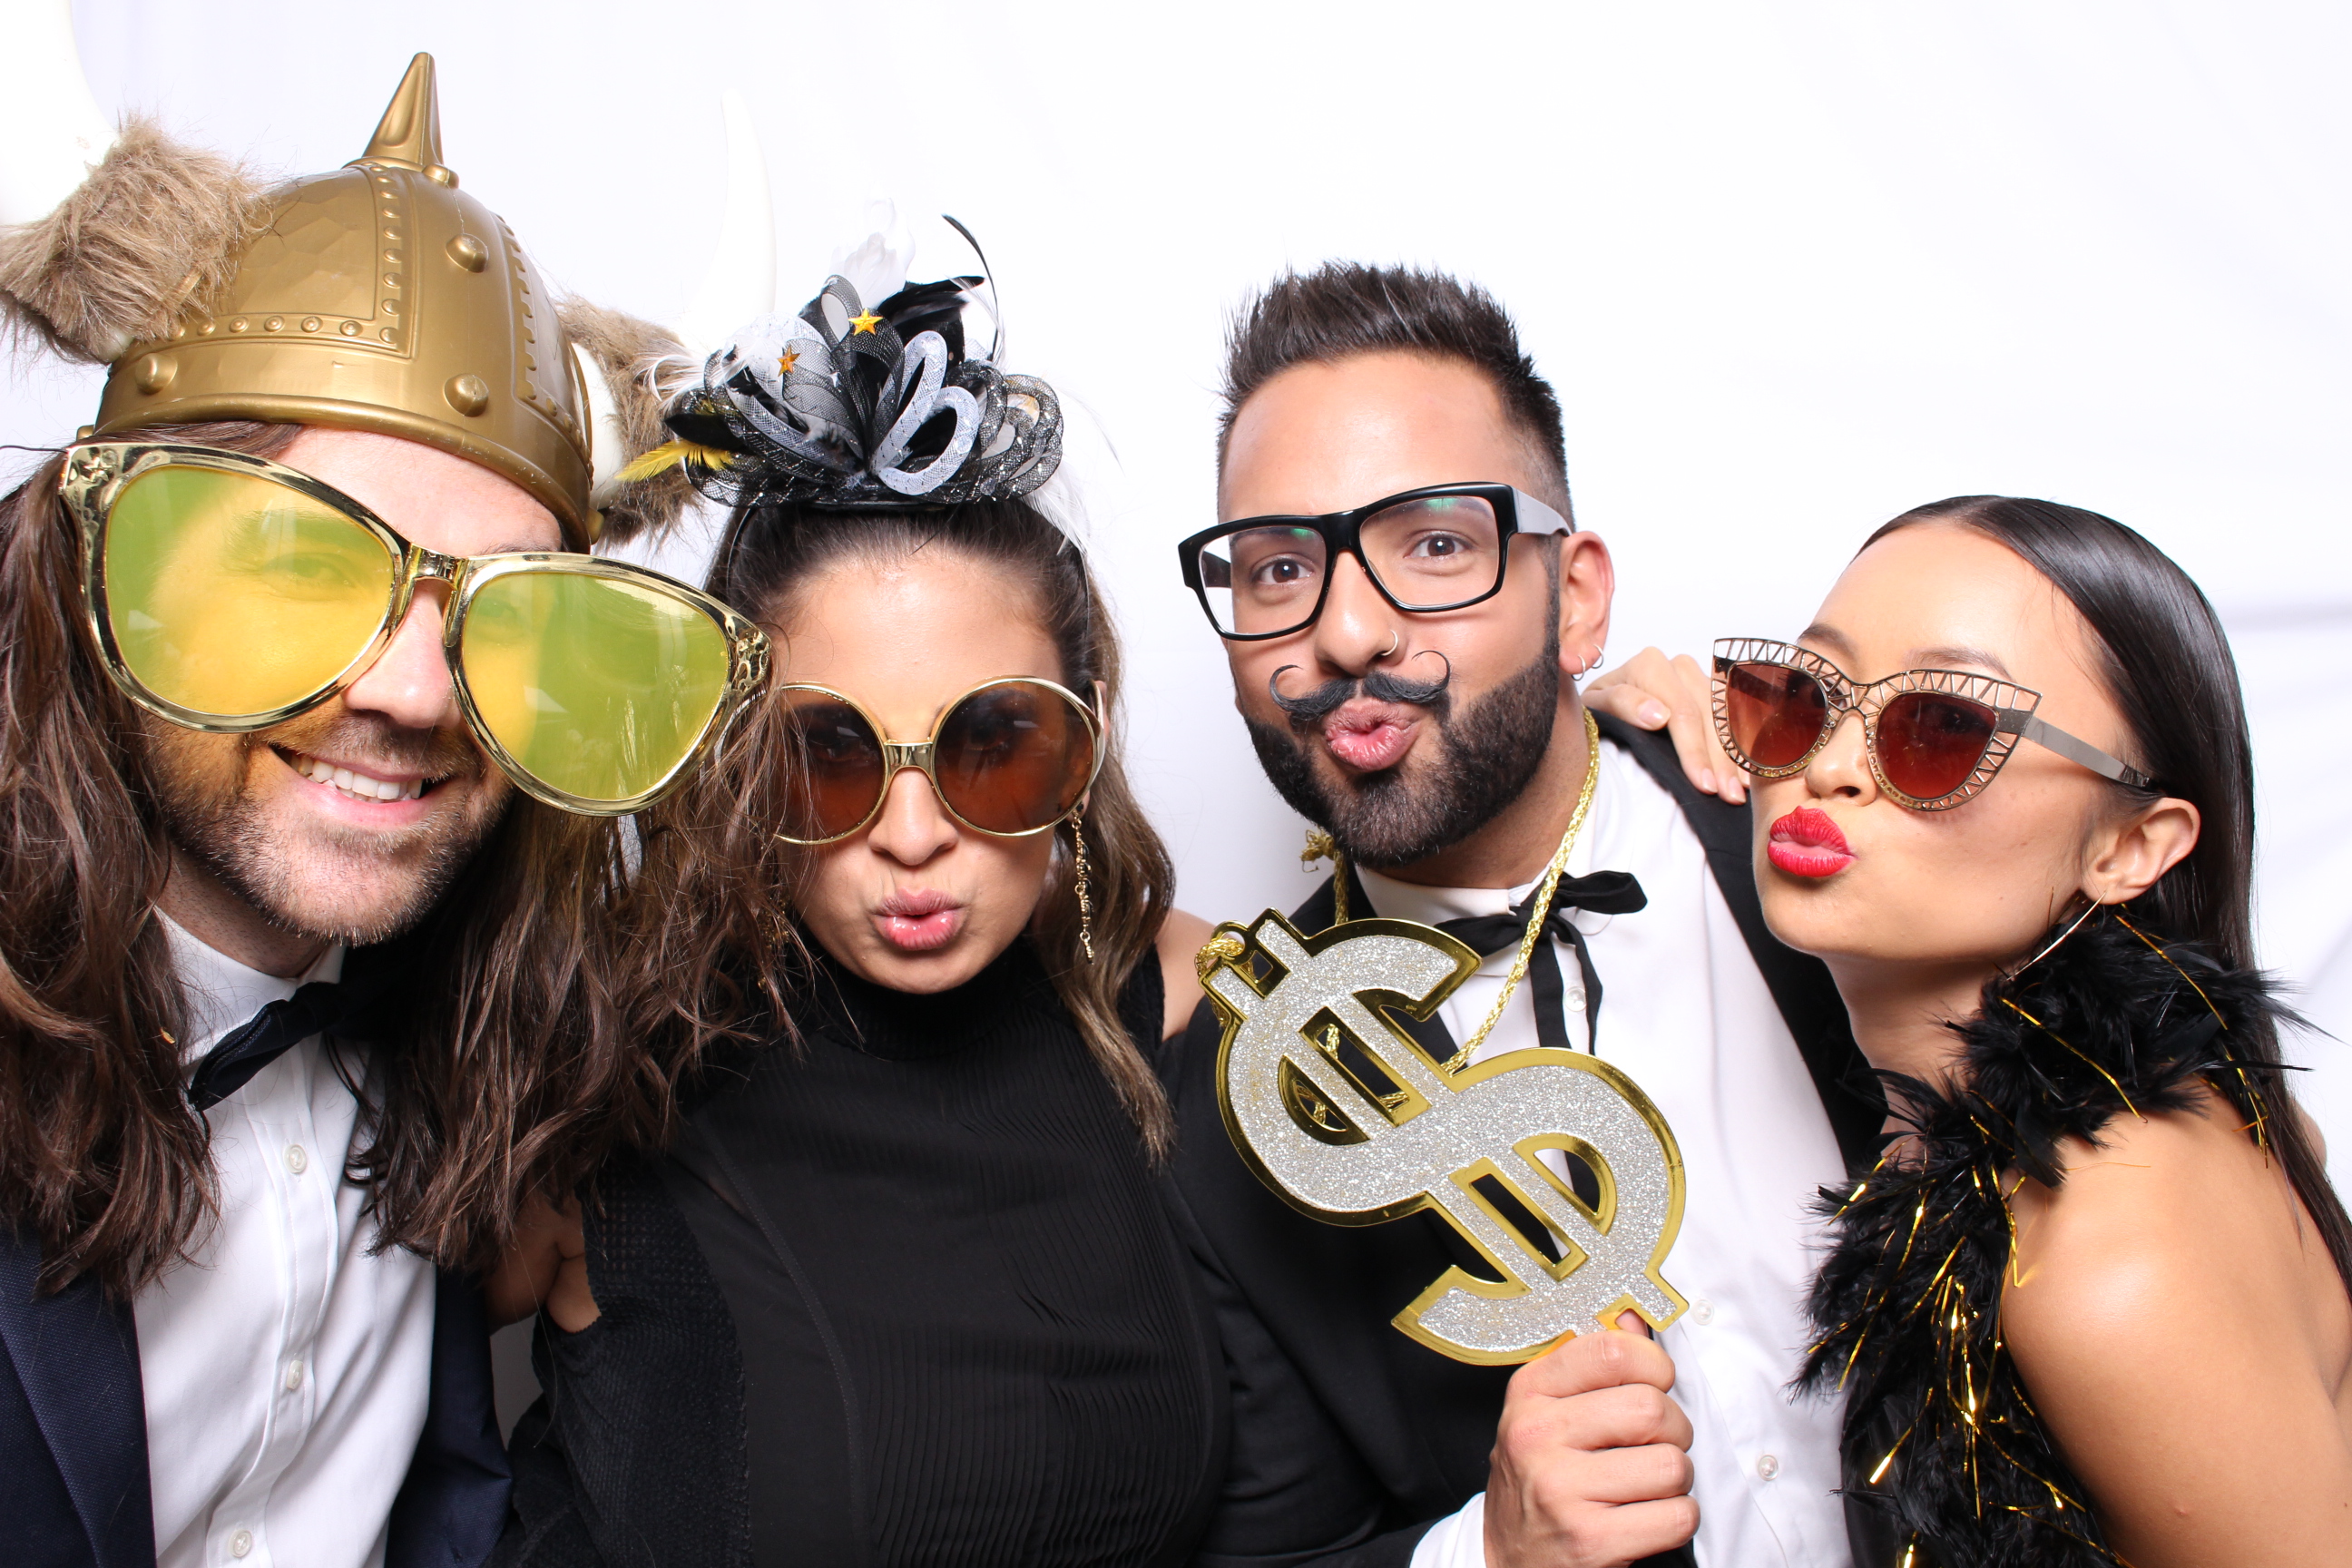 Where And How To Buy Photo Booths. Custom photo booths for venues, brands —  Photo Booth, Vintage style rentals & Sales San Diego, Palm Springs